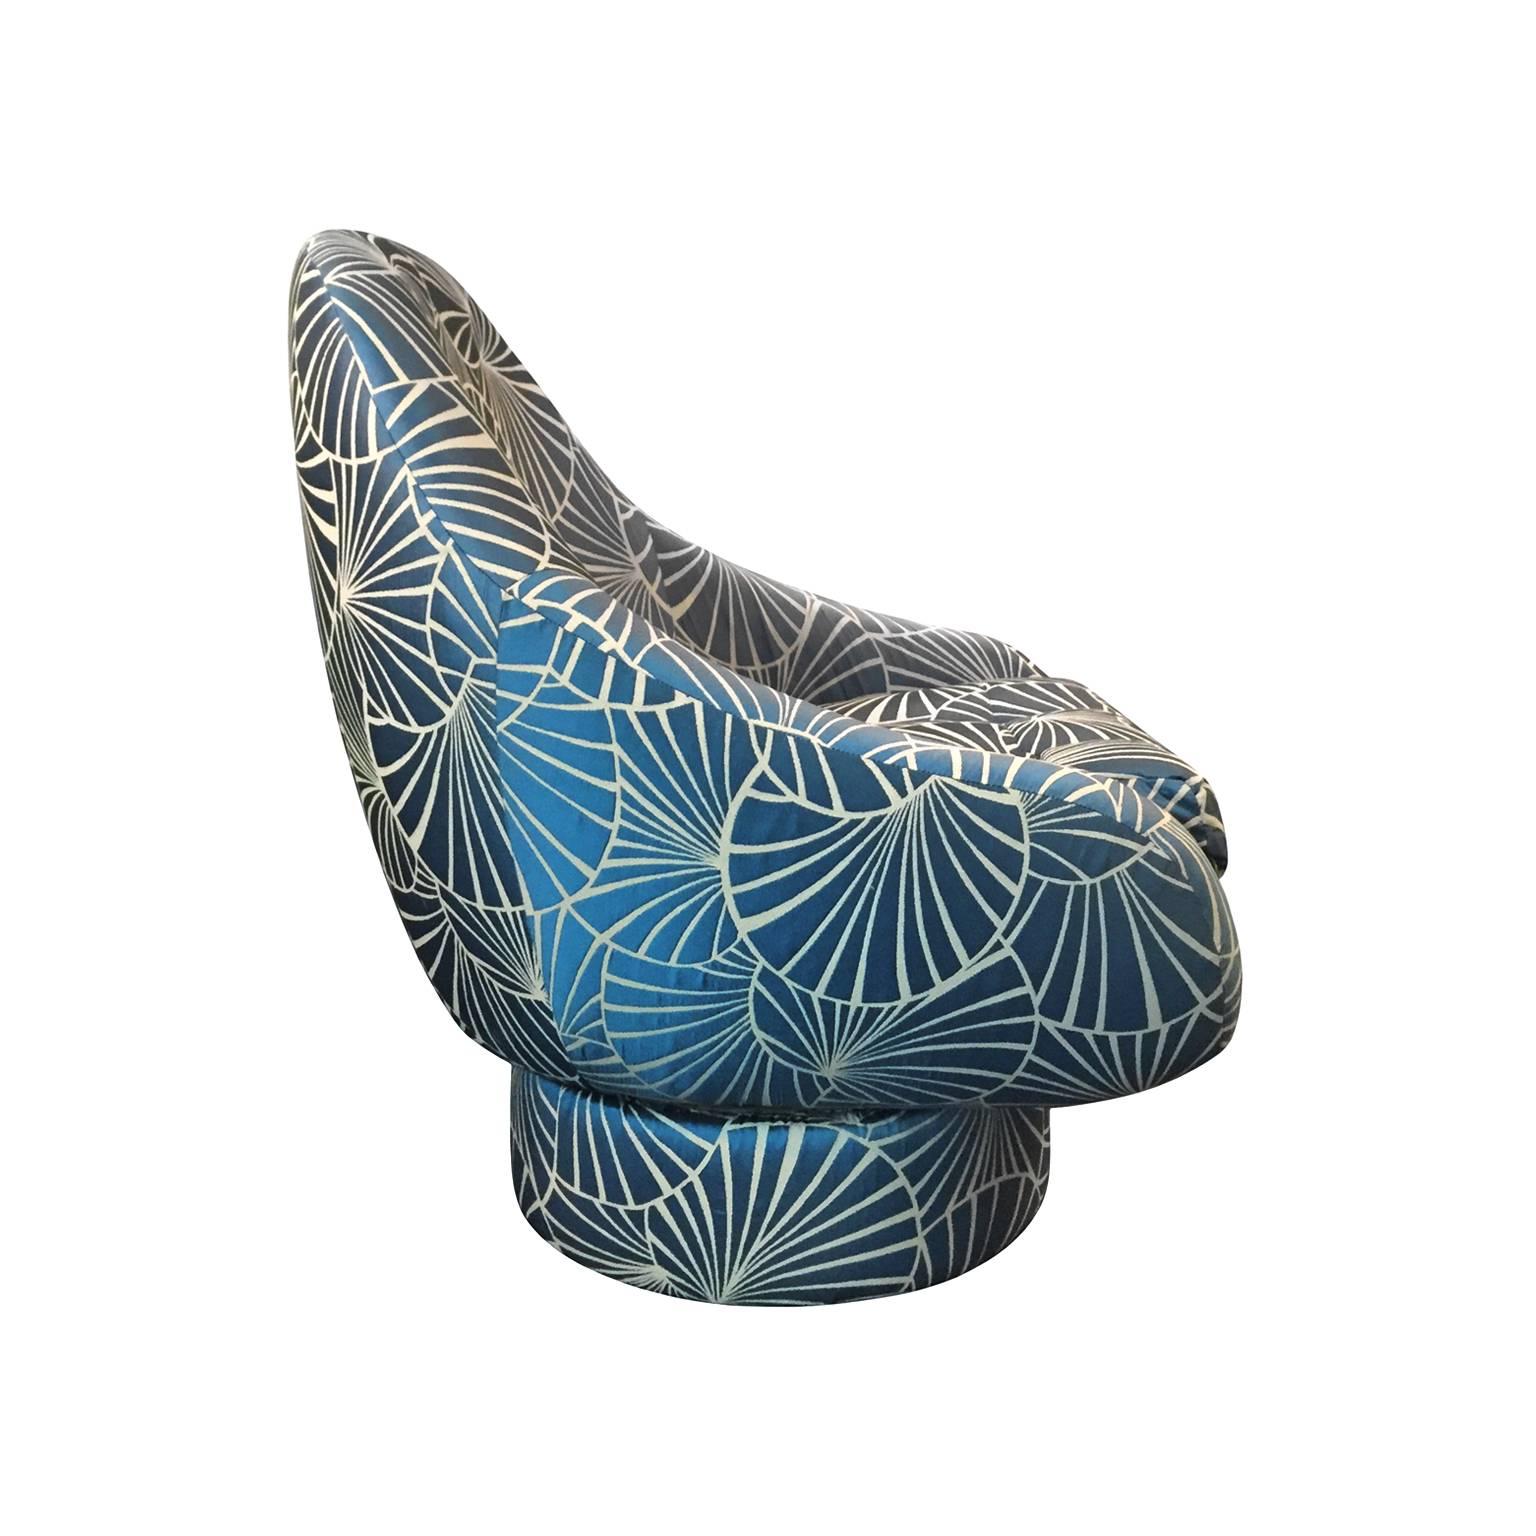 Tufted swivel chair by Steve Chase, newly upholstered in a blue frond fabric, USA, 1970s.